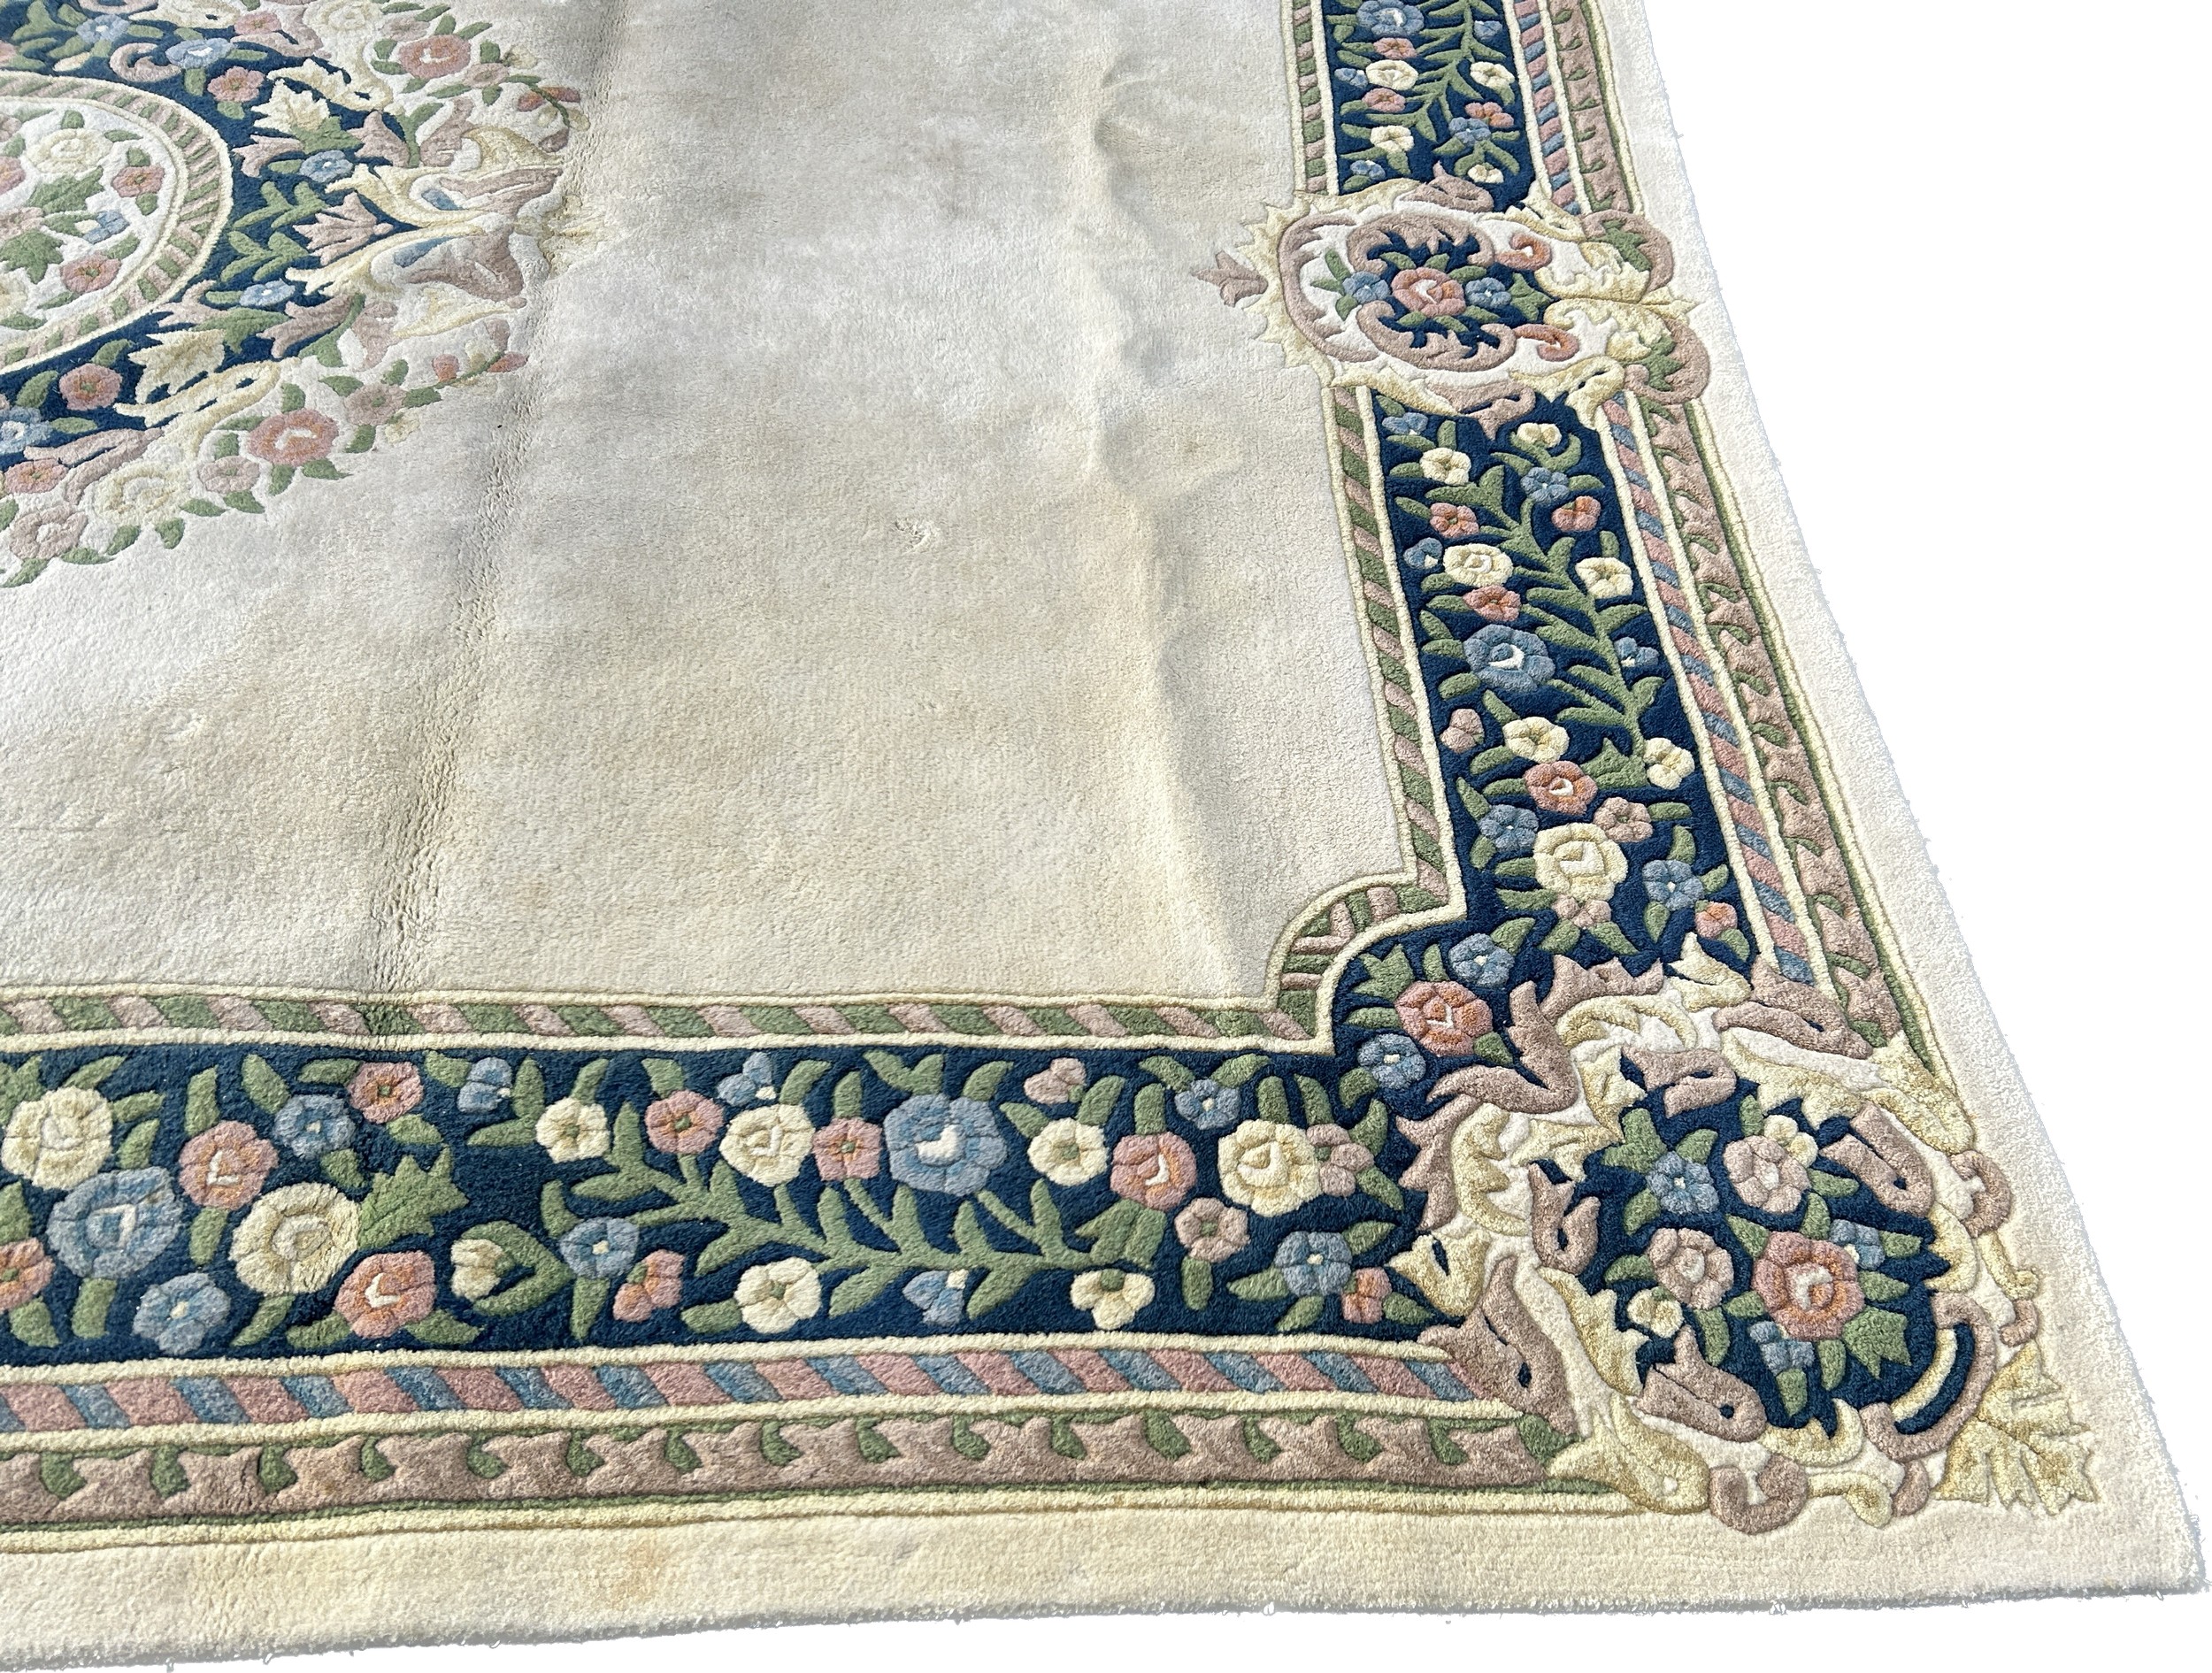 Large cream coloured patterned lounge rug, approximate measurements: 143 x 107 inches - Image 2 of 3